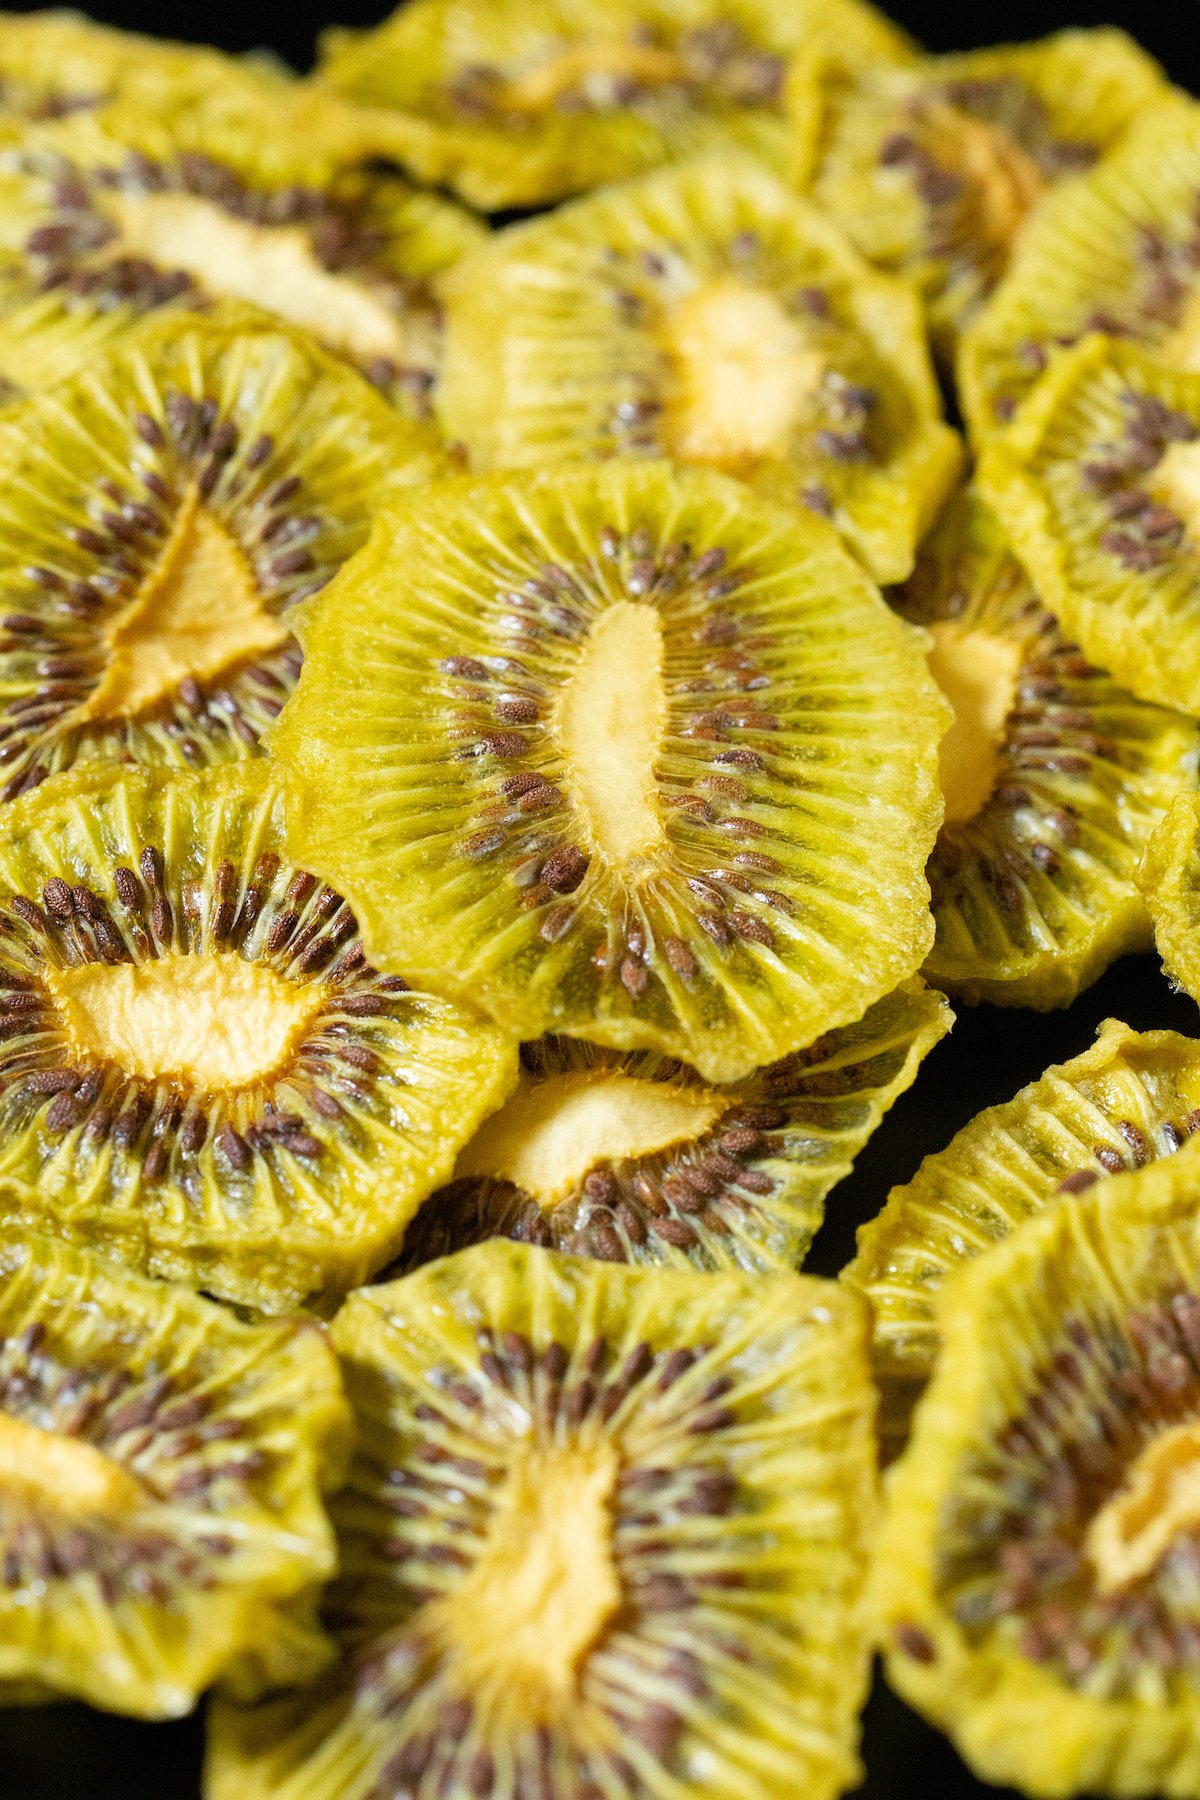 Dozens of dehydrated kiwi chips in a pile on a black background.